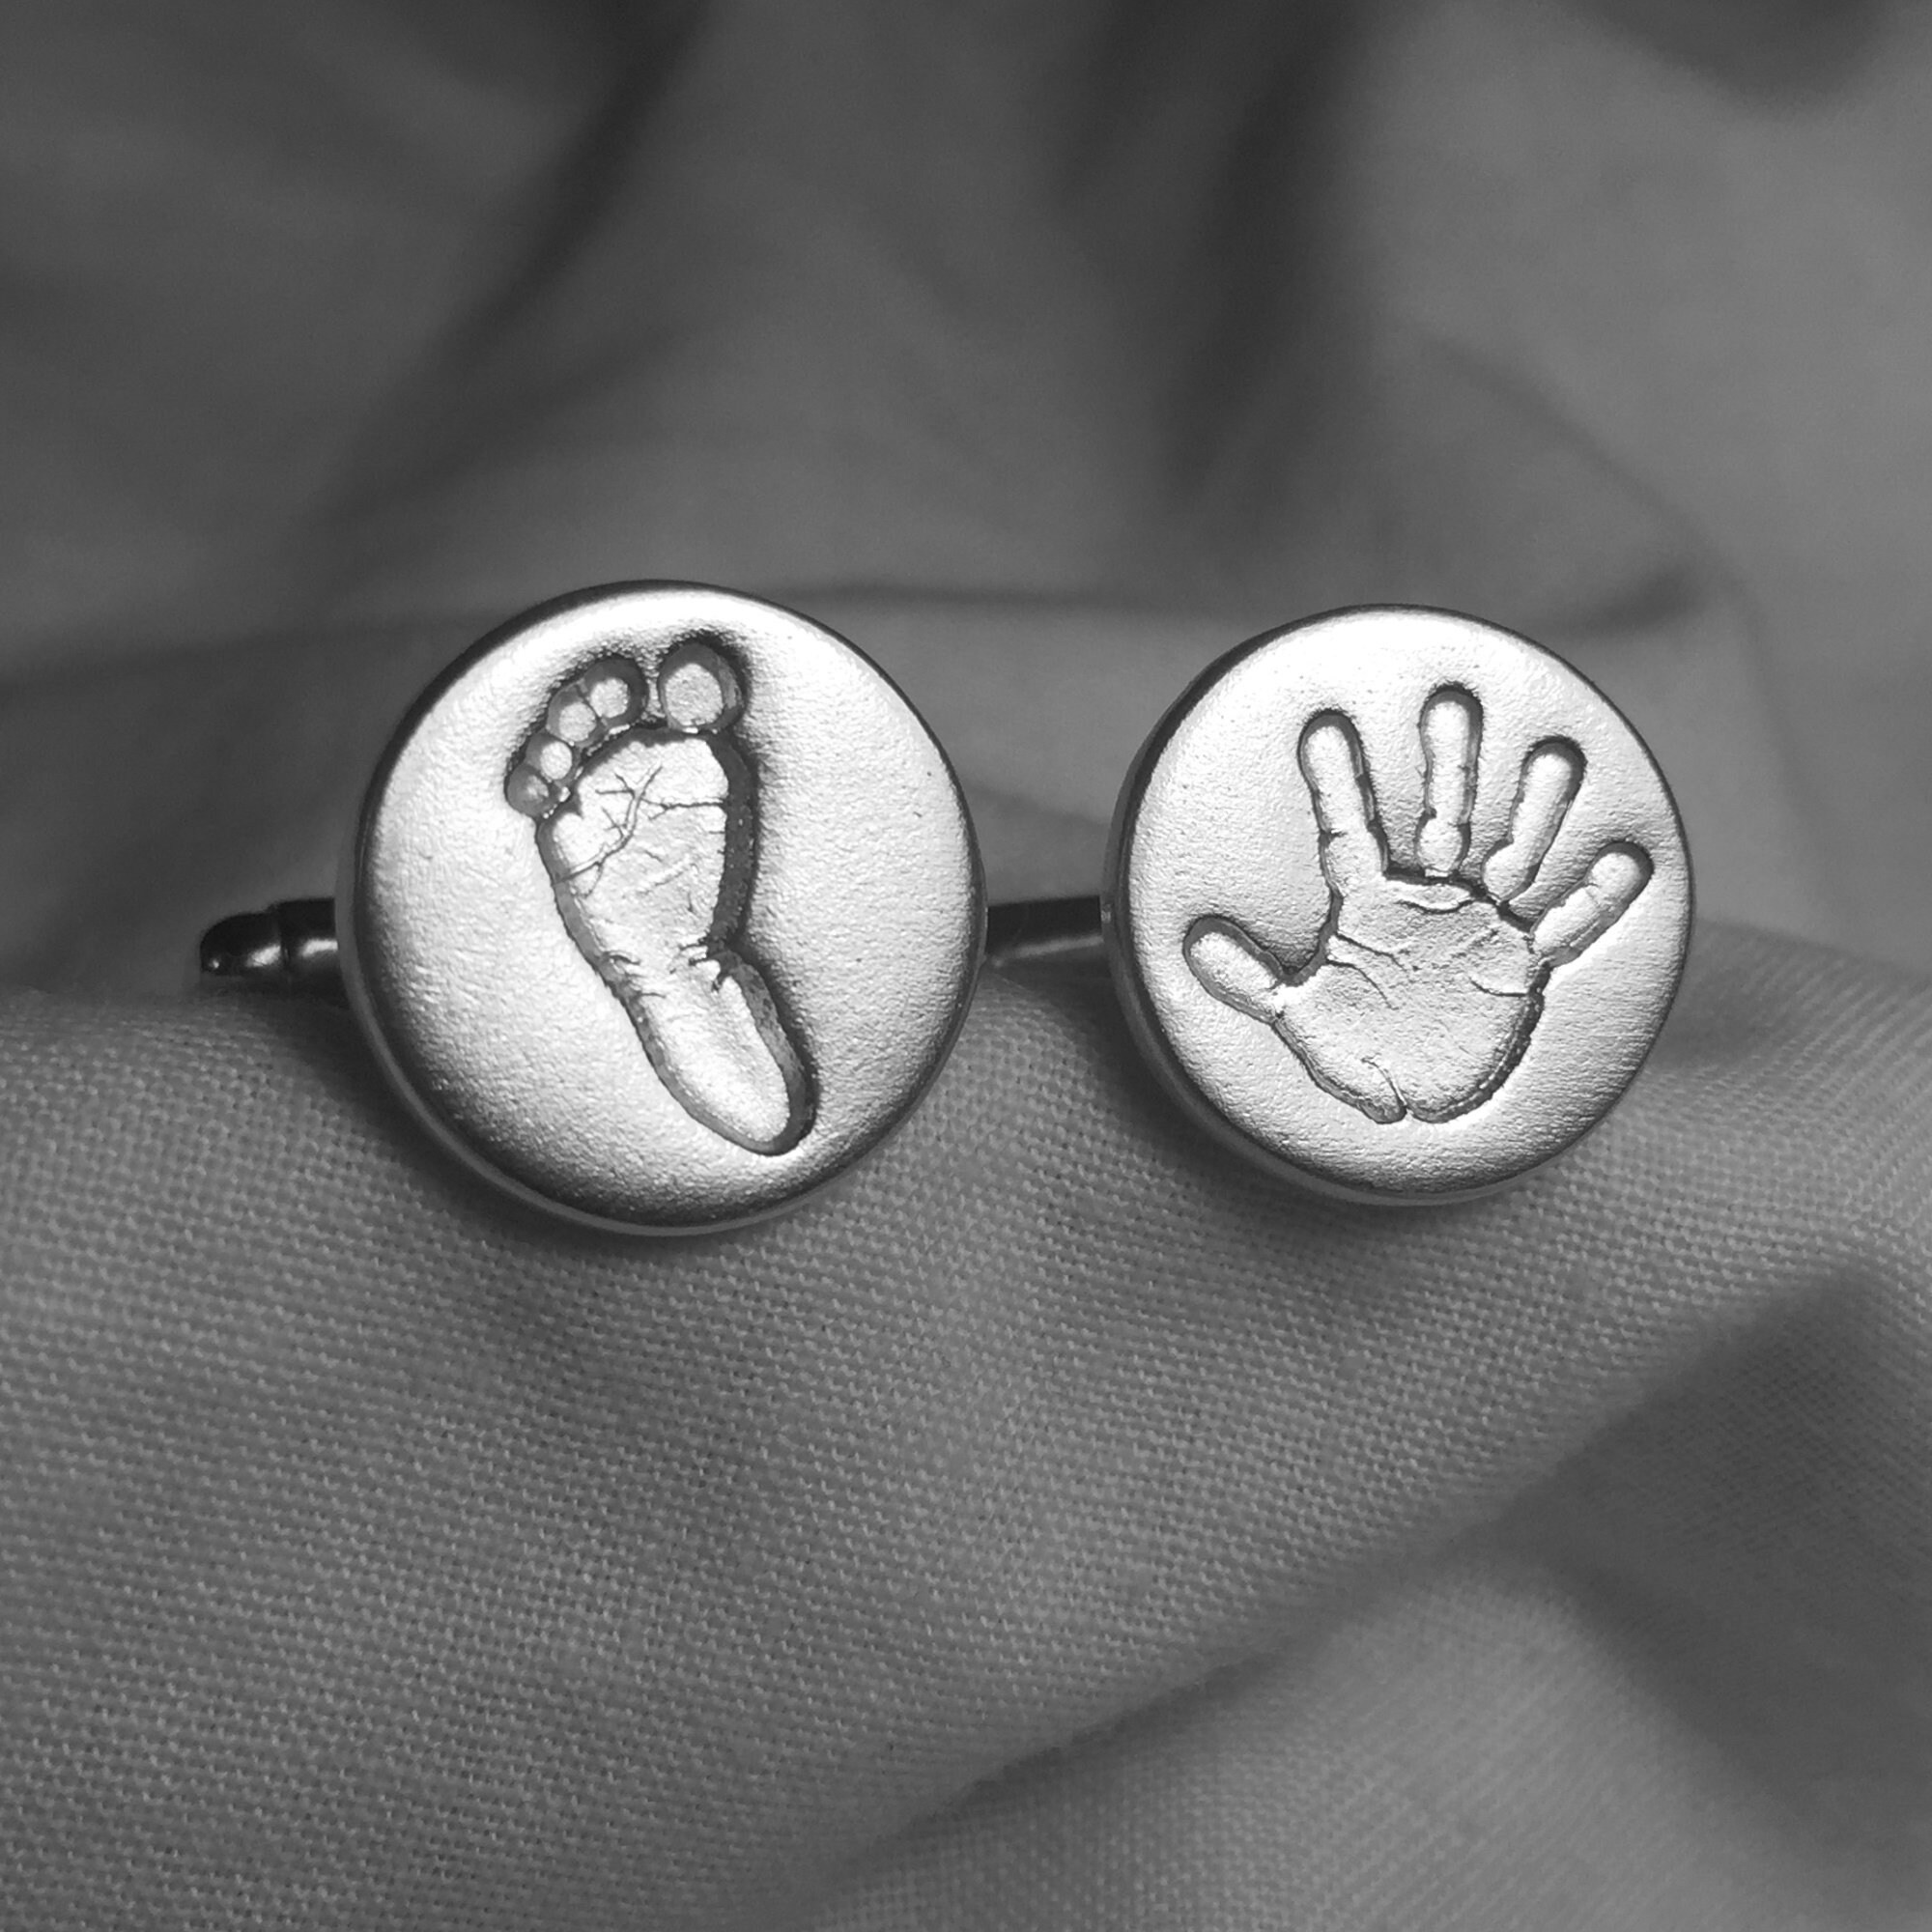 Handprint Footprint Cufflinks - Hand Print Cuff Links Gifts For New Father Present Grandfather Fathers Day